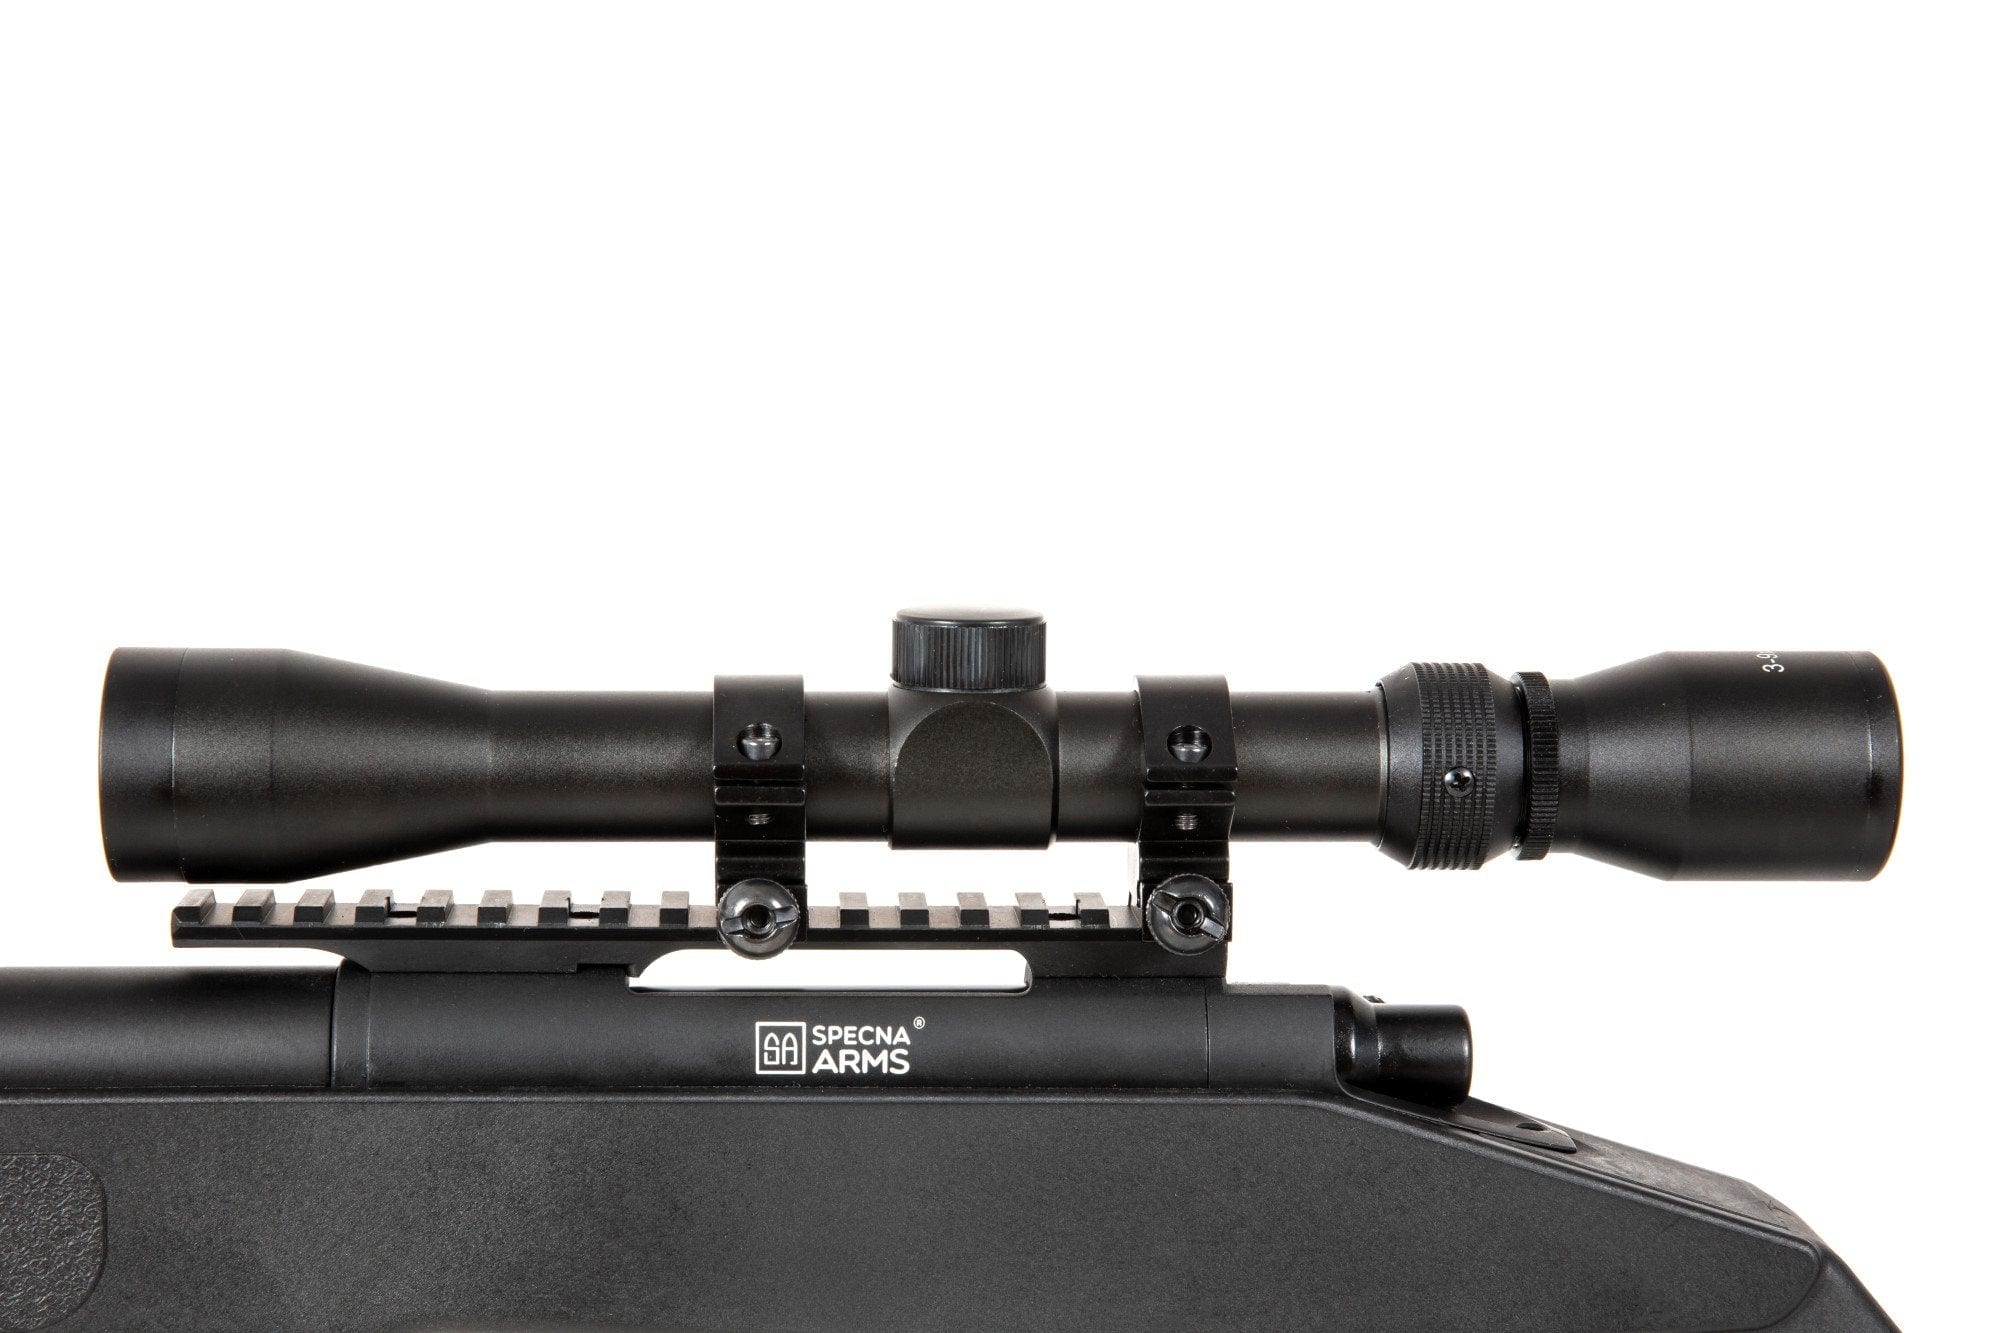 SA-CORE ™ S03 replica sniper rifle with scope and bipod - black by Specna Arms on Airsoft Mania Europe